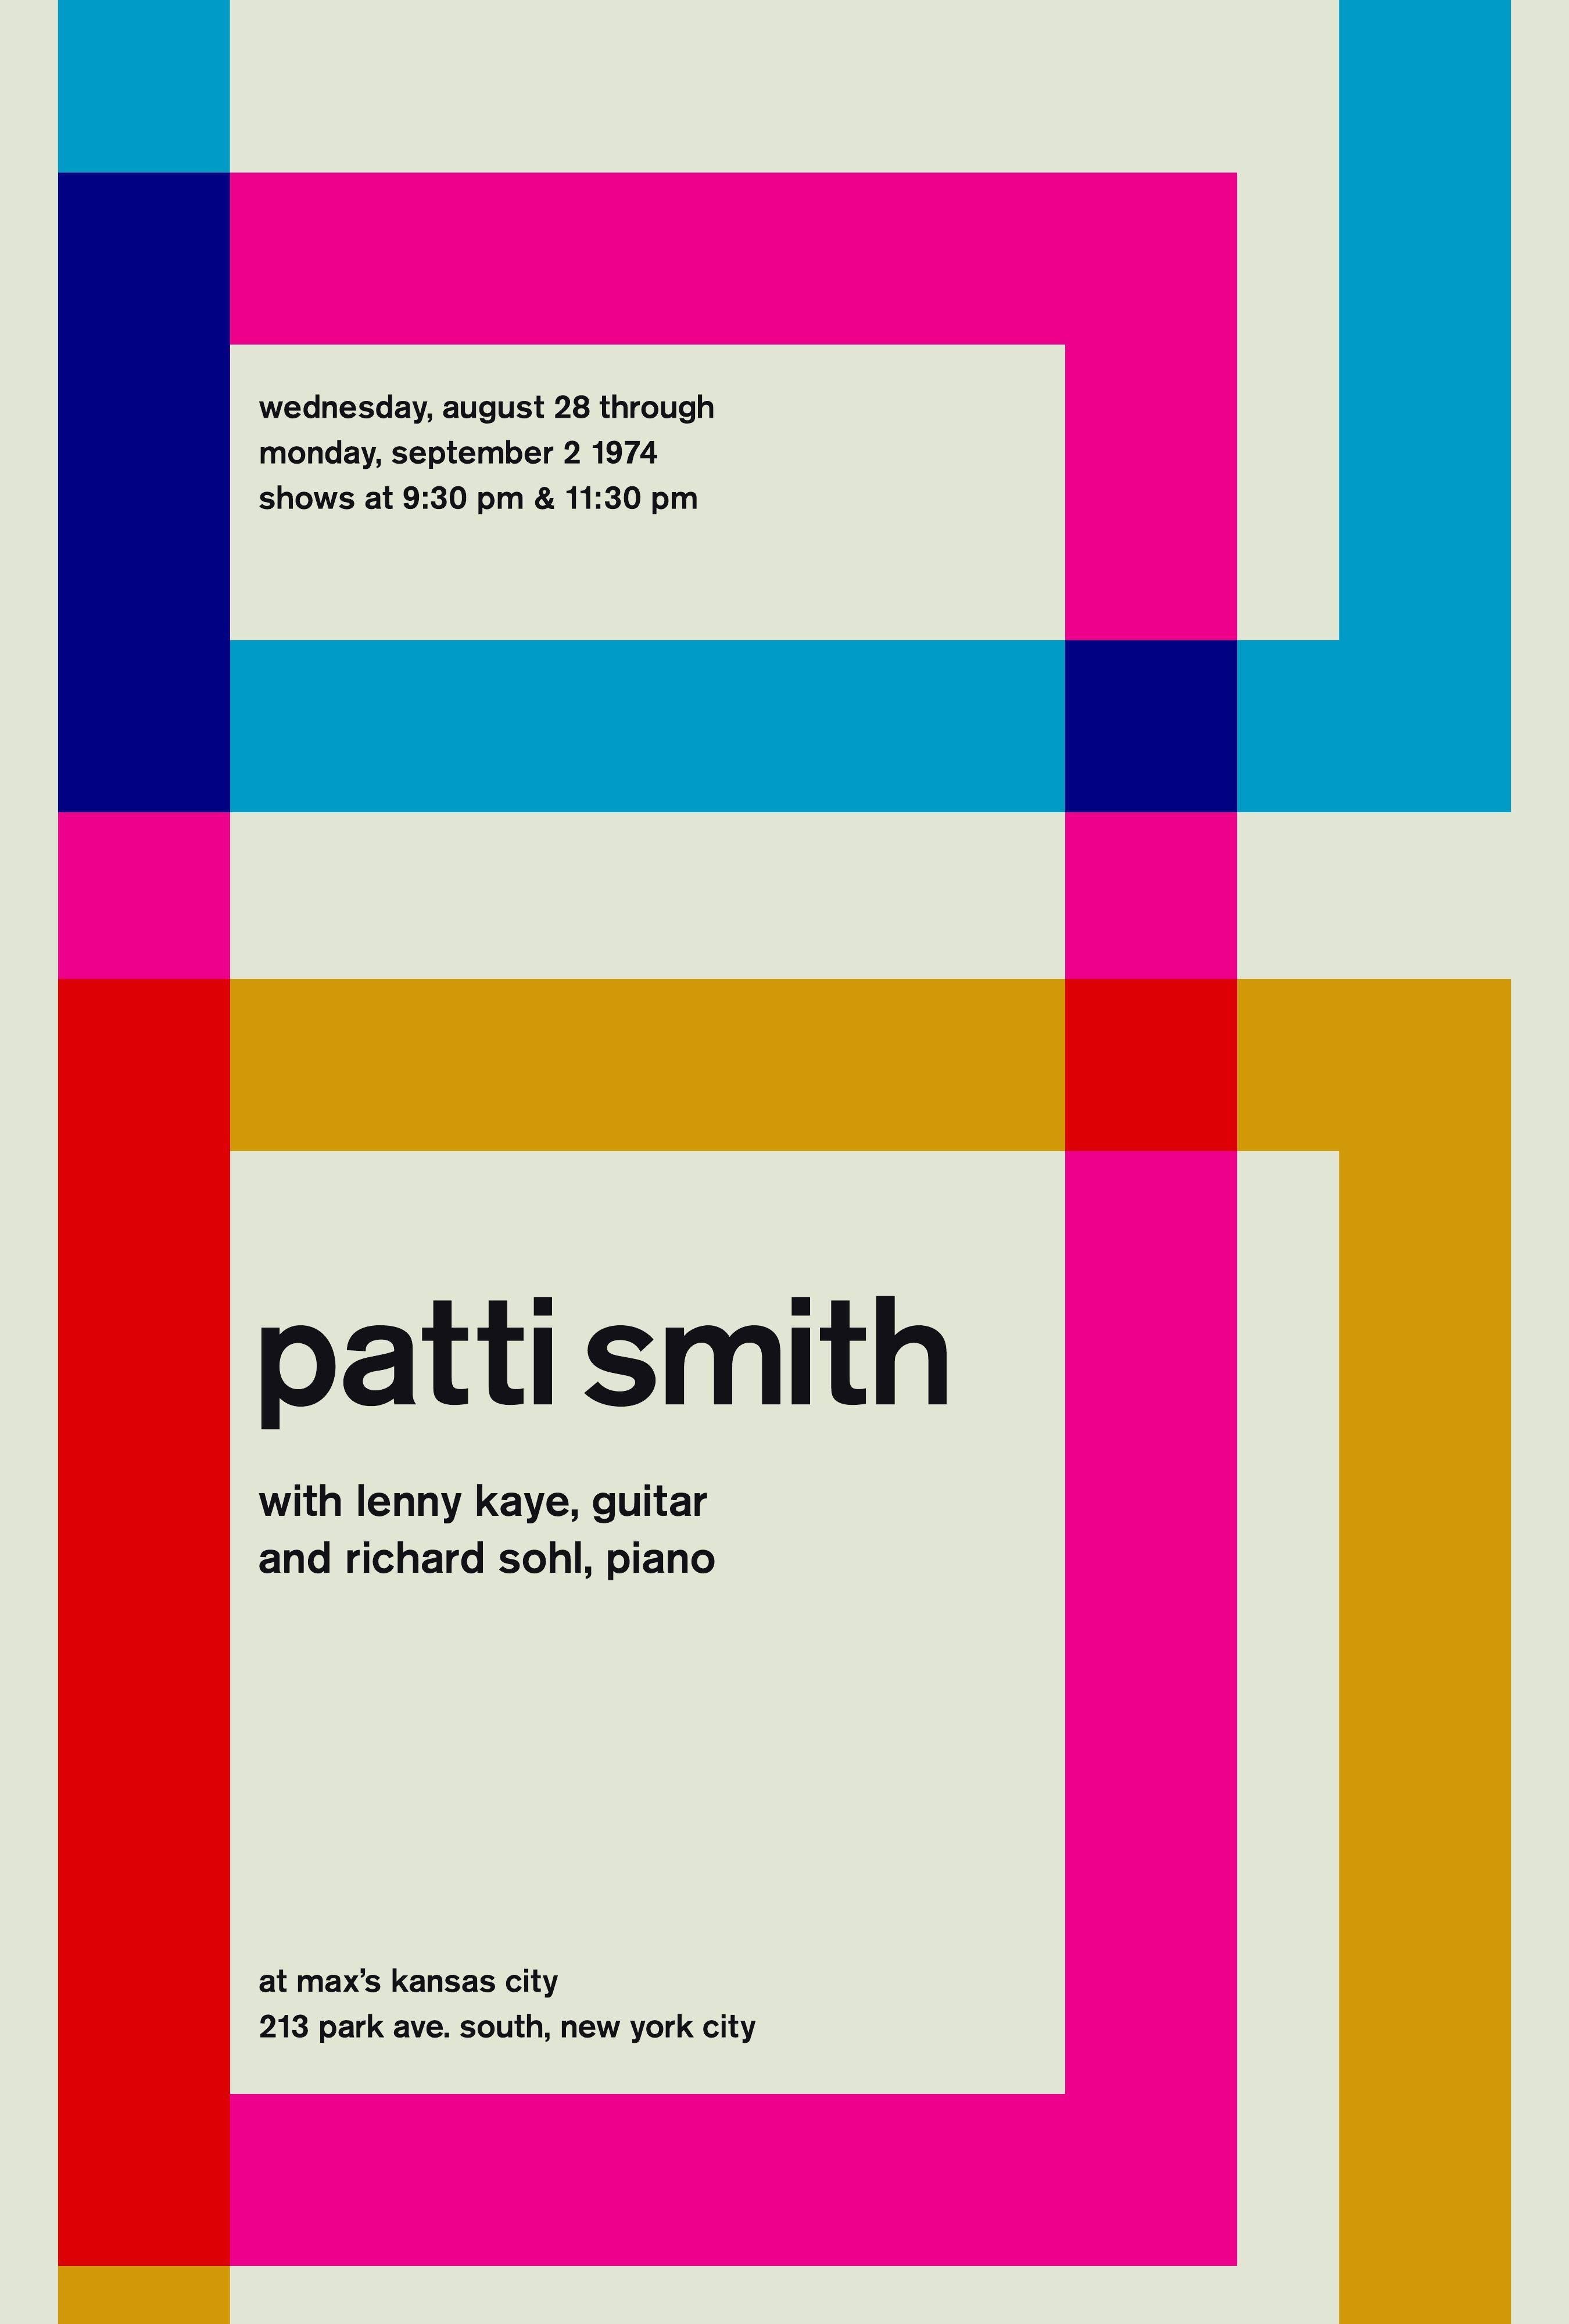 Vintage inspired graphic design print which re-imagines this original Patti Smith concert date to produce a stunning minimalist look inspired by mid century modernism 

Printed on Archival Epson Matte Paper with Remarkable Color Presentation